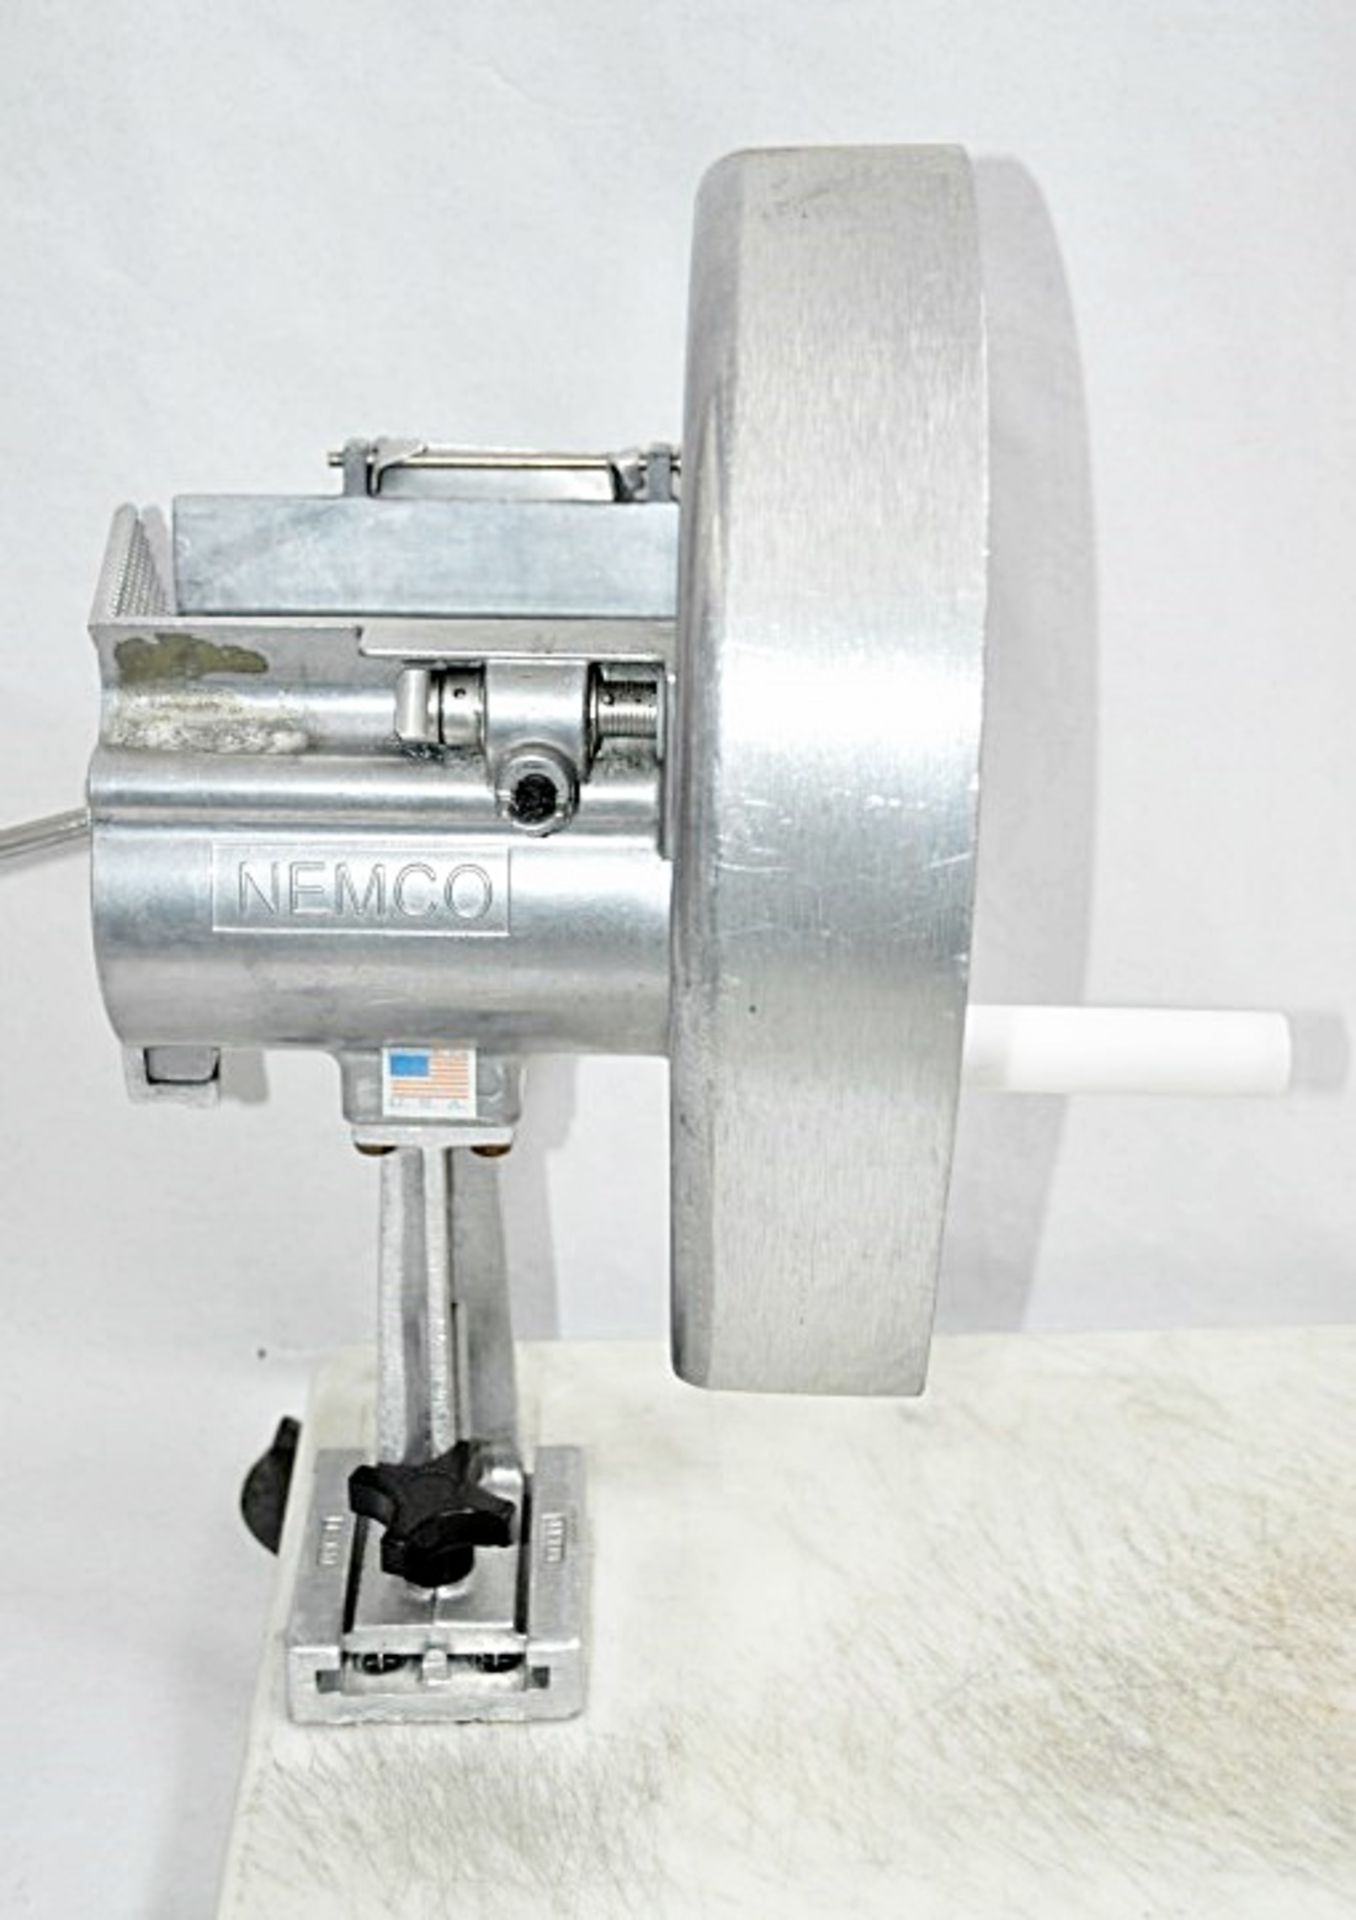 1 x Nemco Easy Slicer™ Vegetable Slicer - Includes Portable Base - Used, In Working Condition - - Image 3 of 6